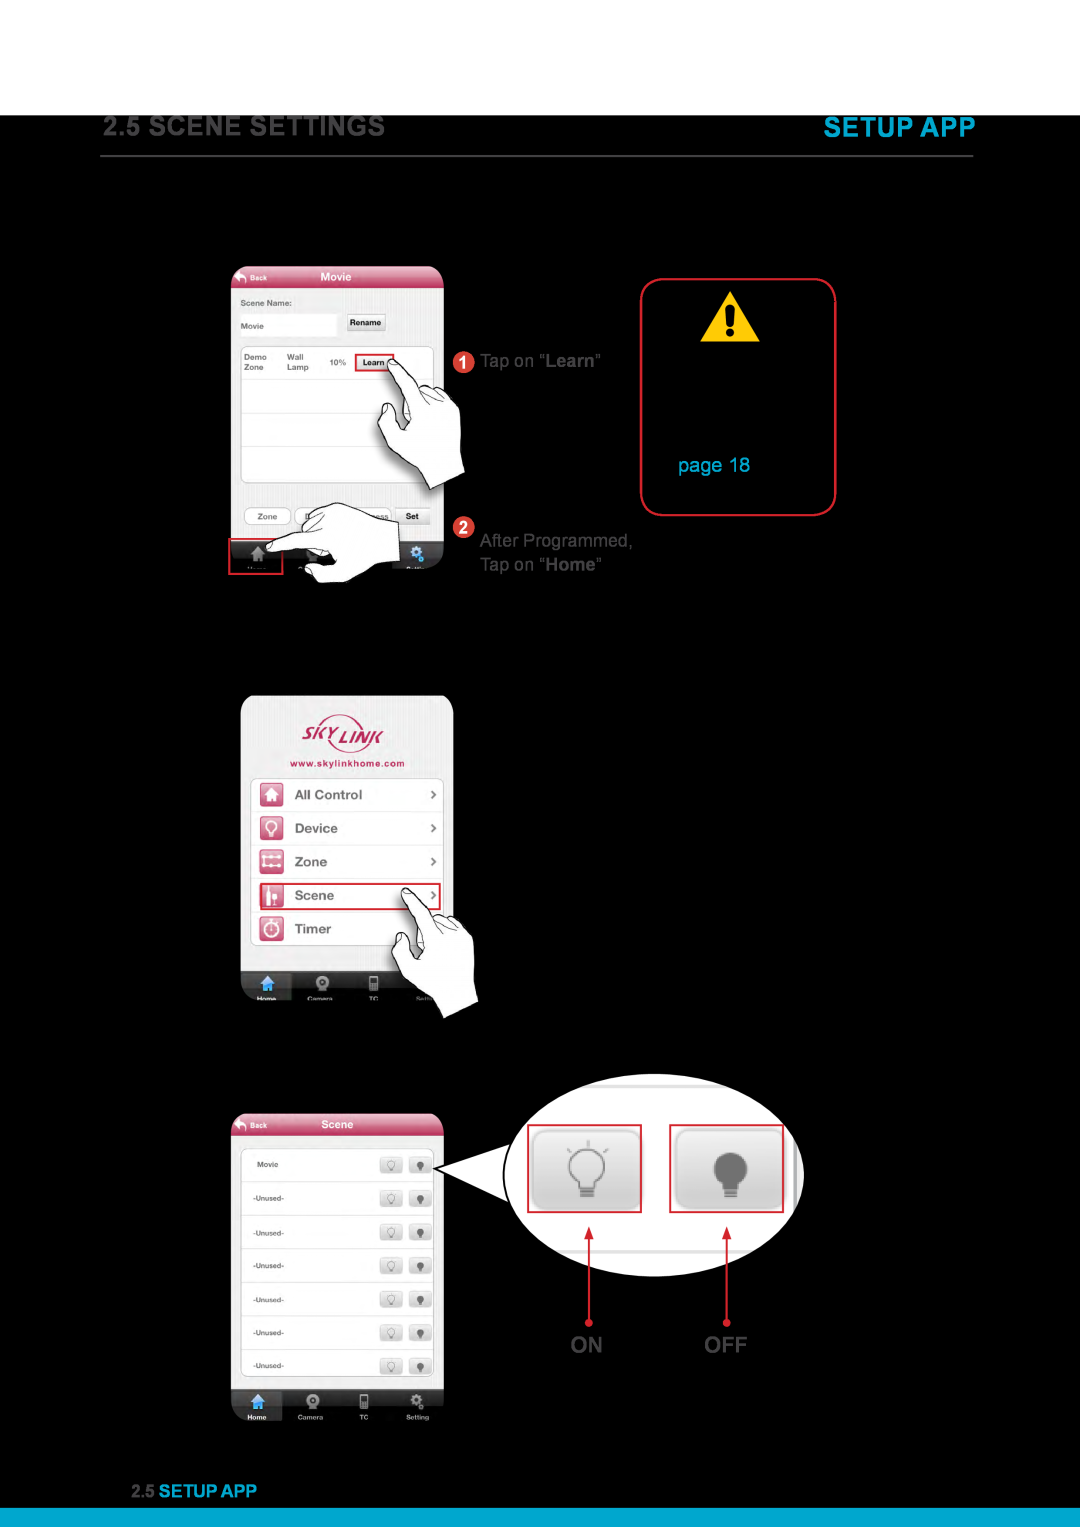 SkyLink HU-318 Tap on “Scene”, Tap icons to control the device, ON/OFF switch, On Off, Scene Settings, Setup App 